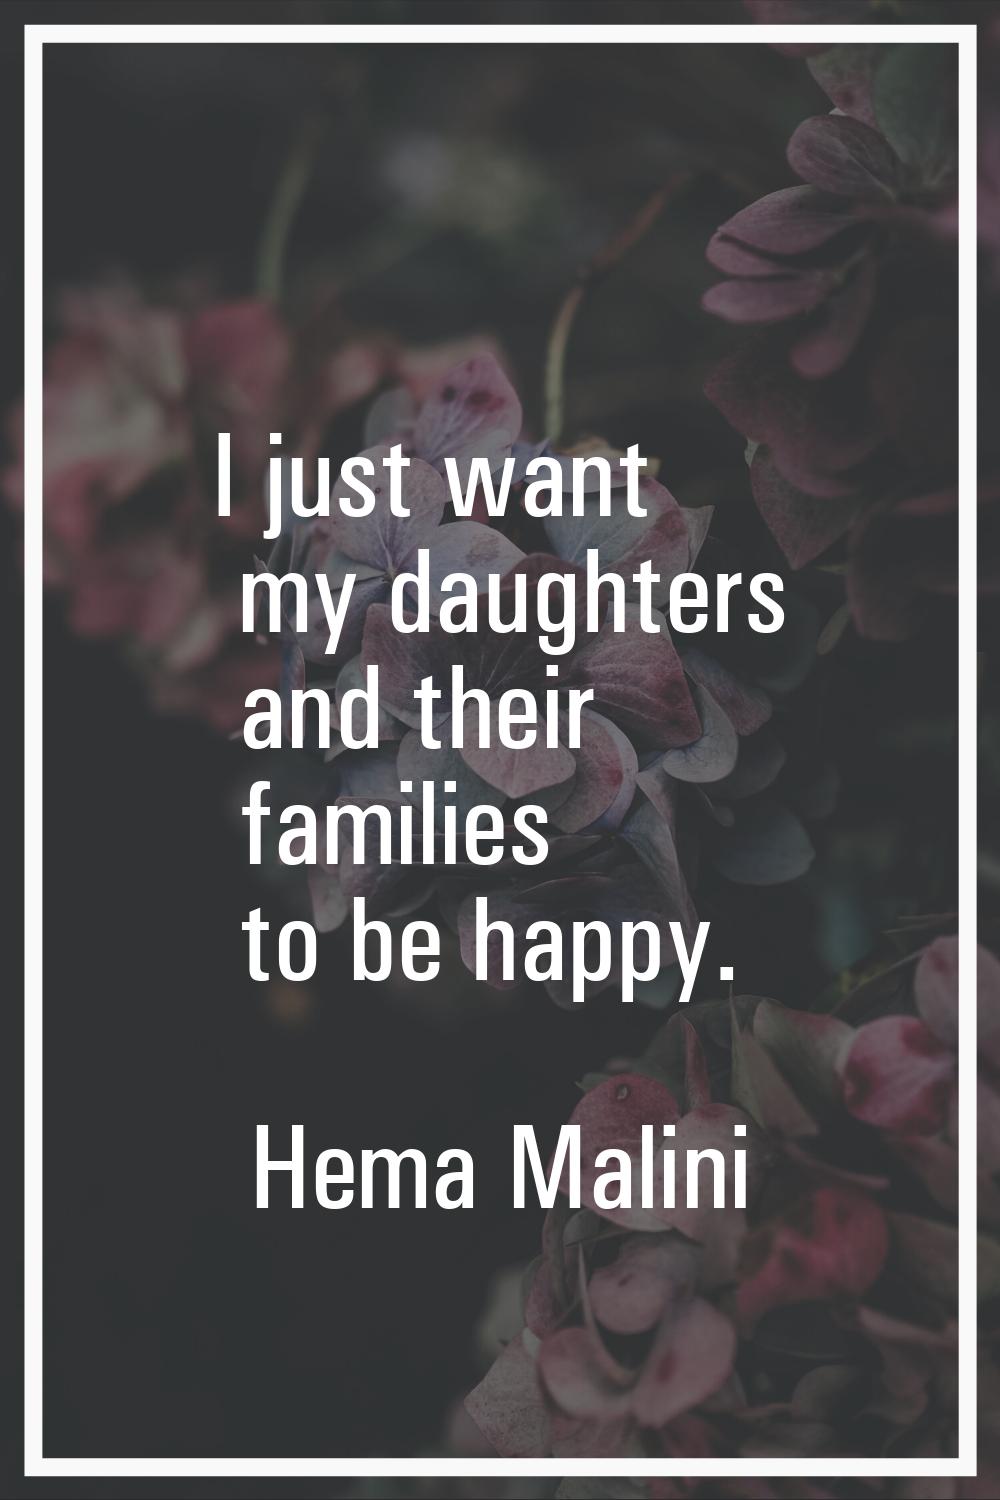 I just want my daughters and their families to be happy.